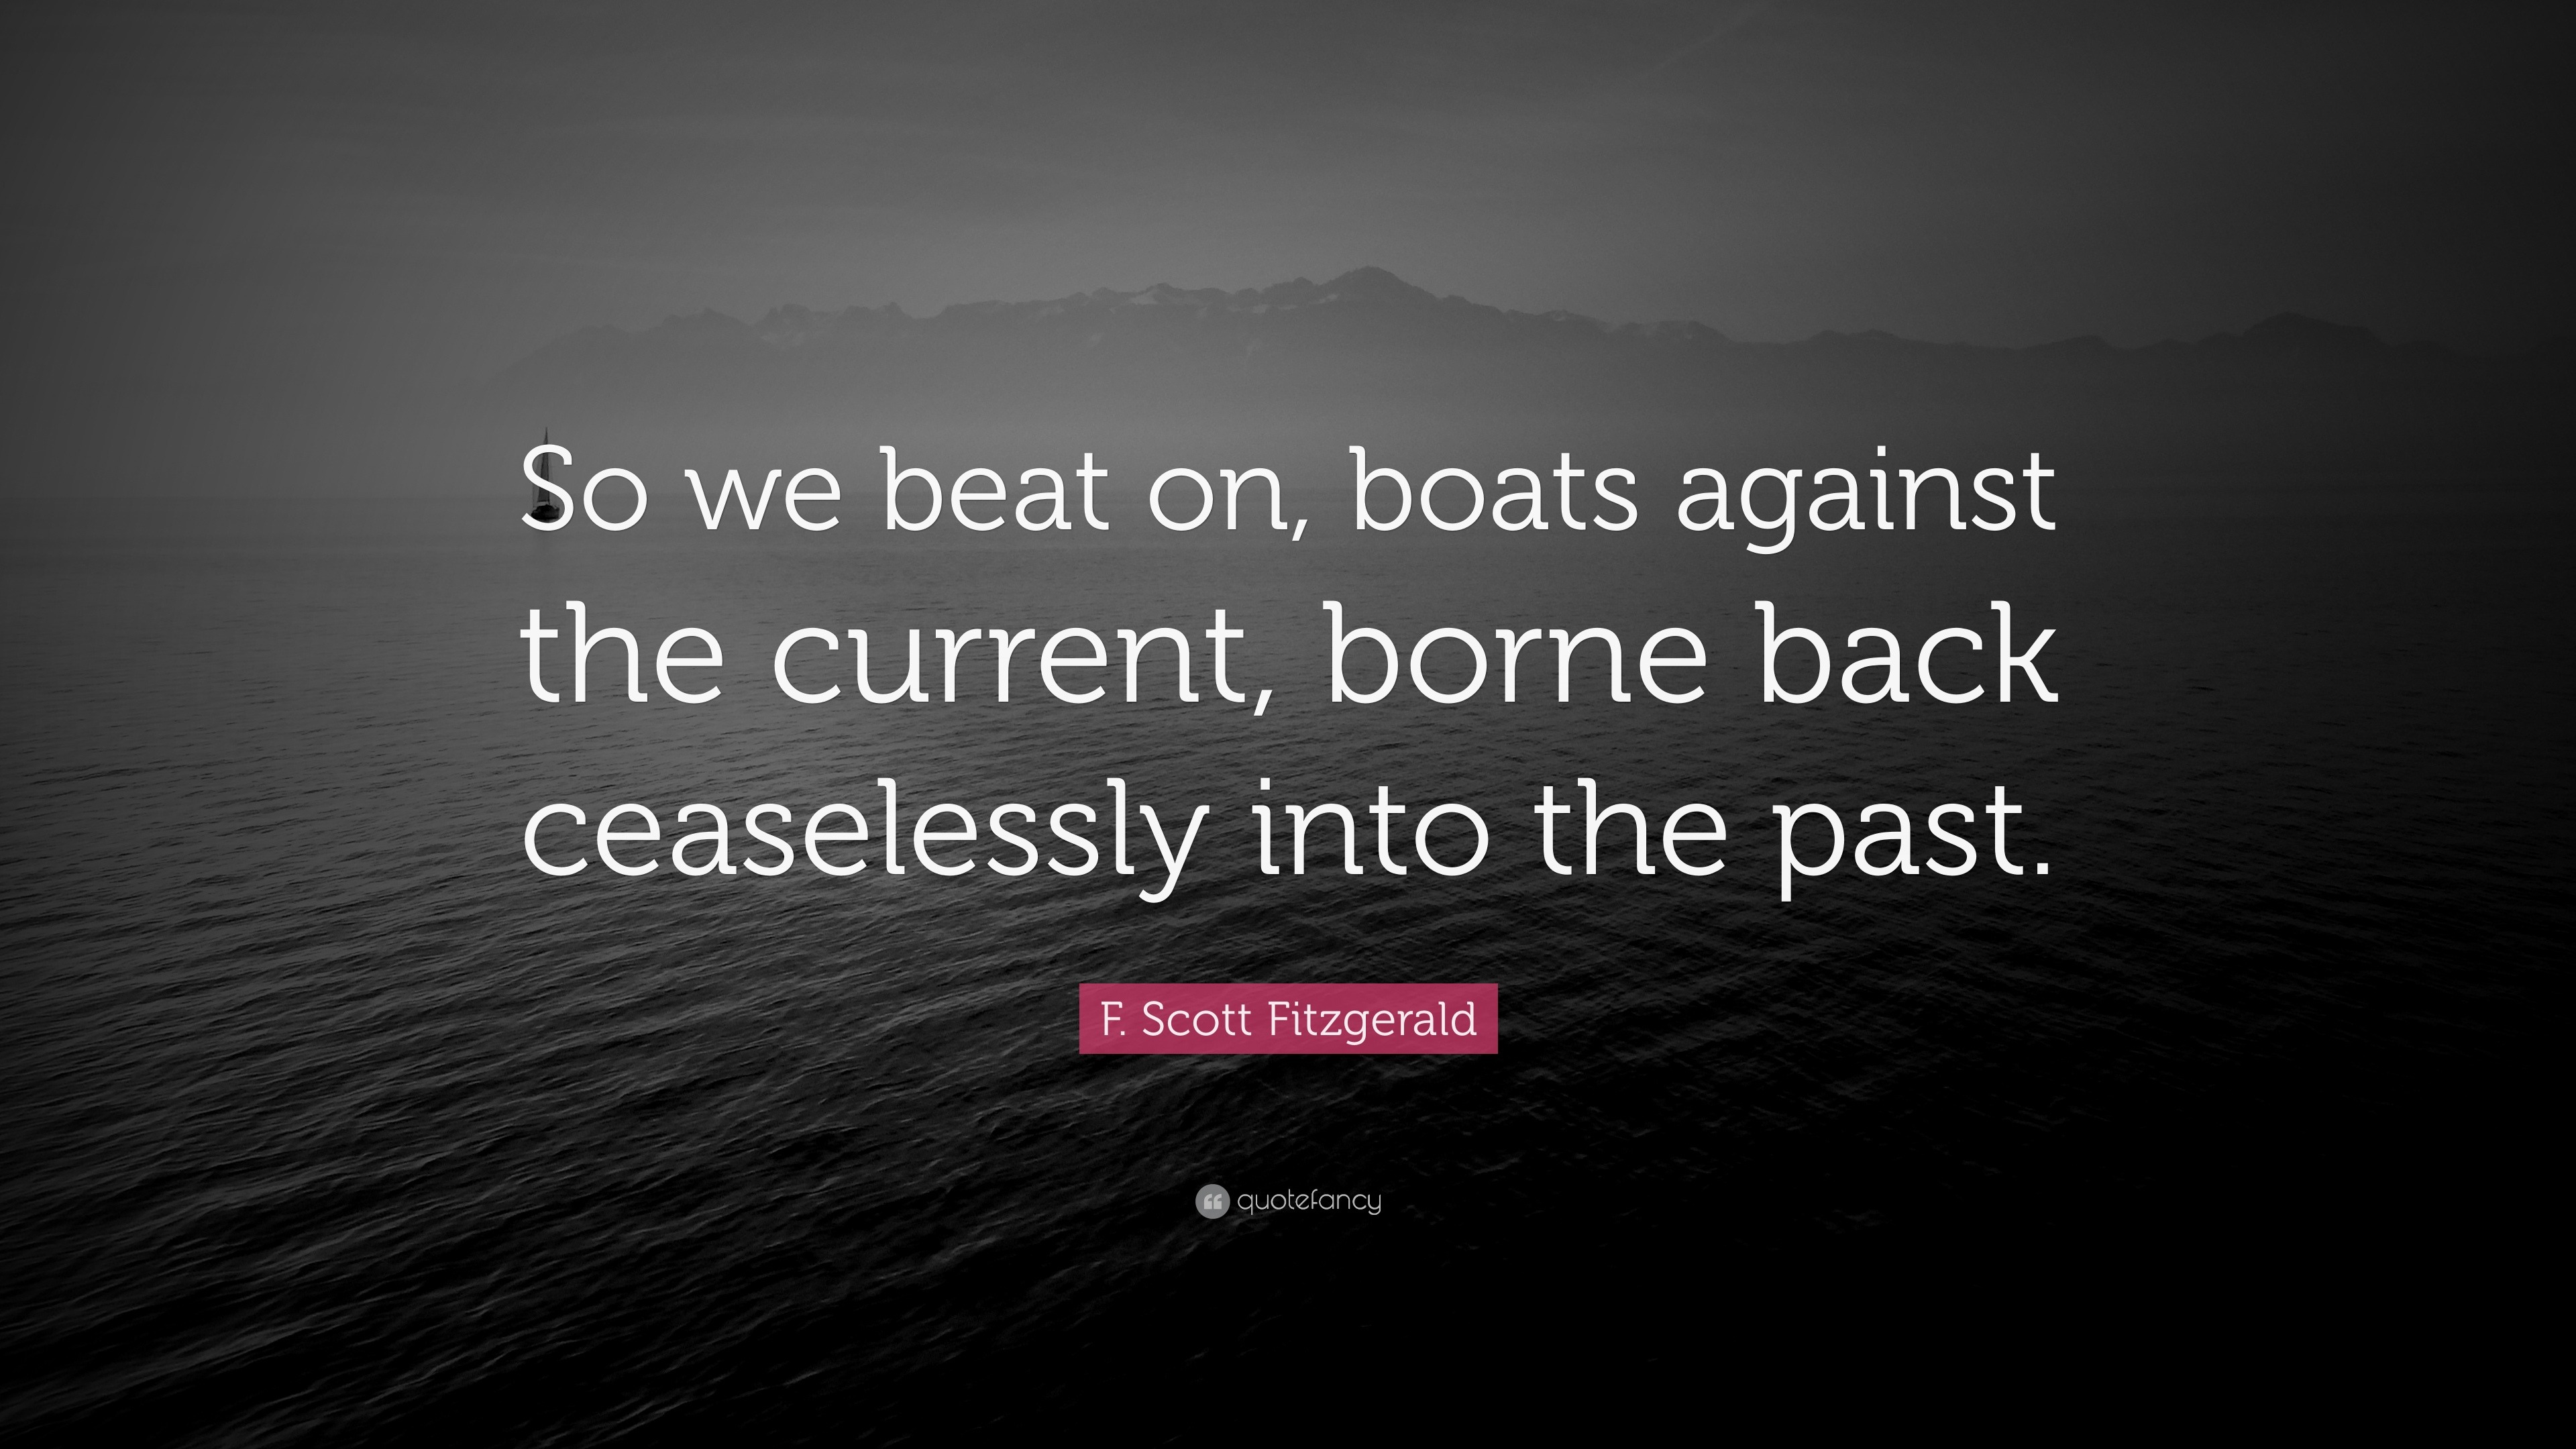 F. Scott Fitzgerald Quote: “So We Beat On, Boats Against The Current, Borne Back Ceaselessly Into